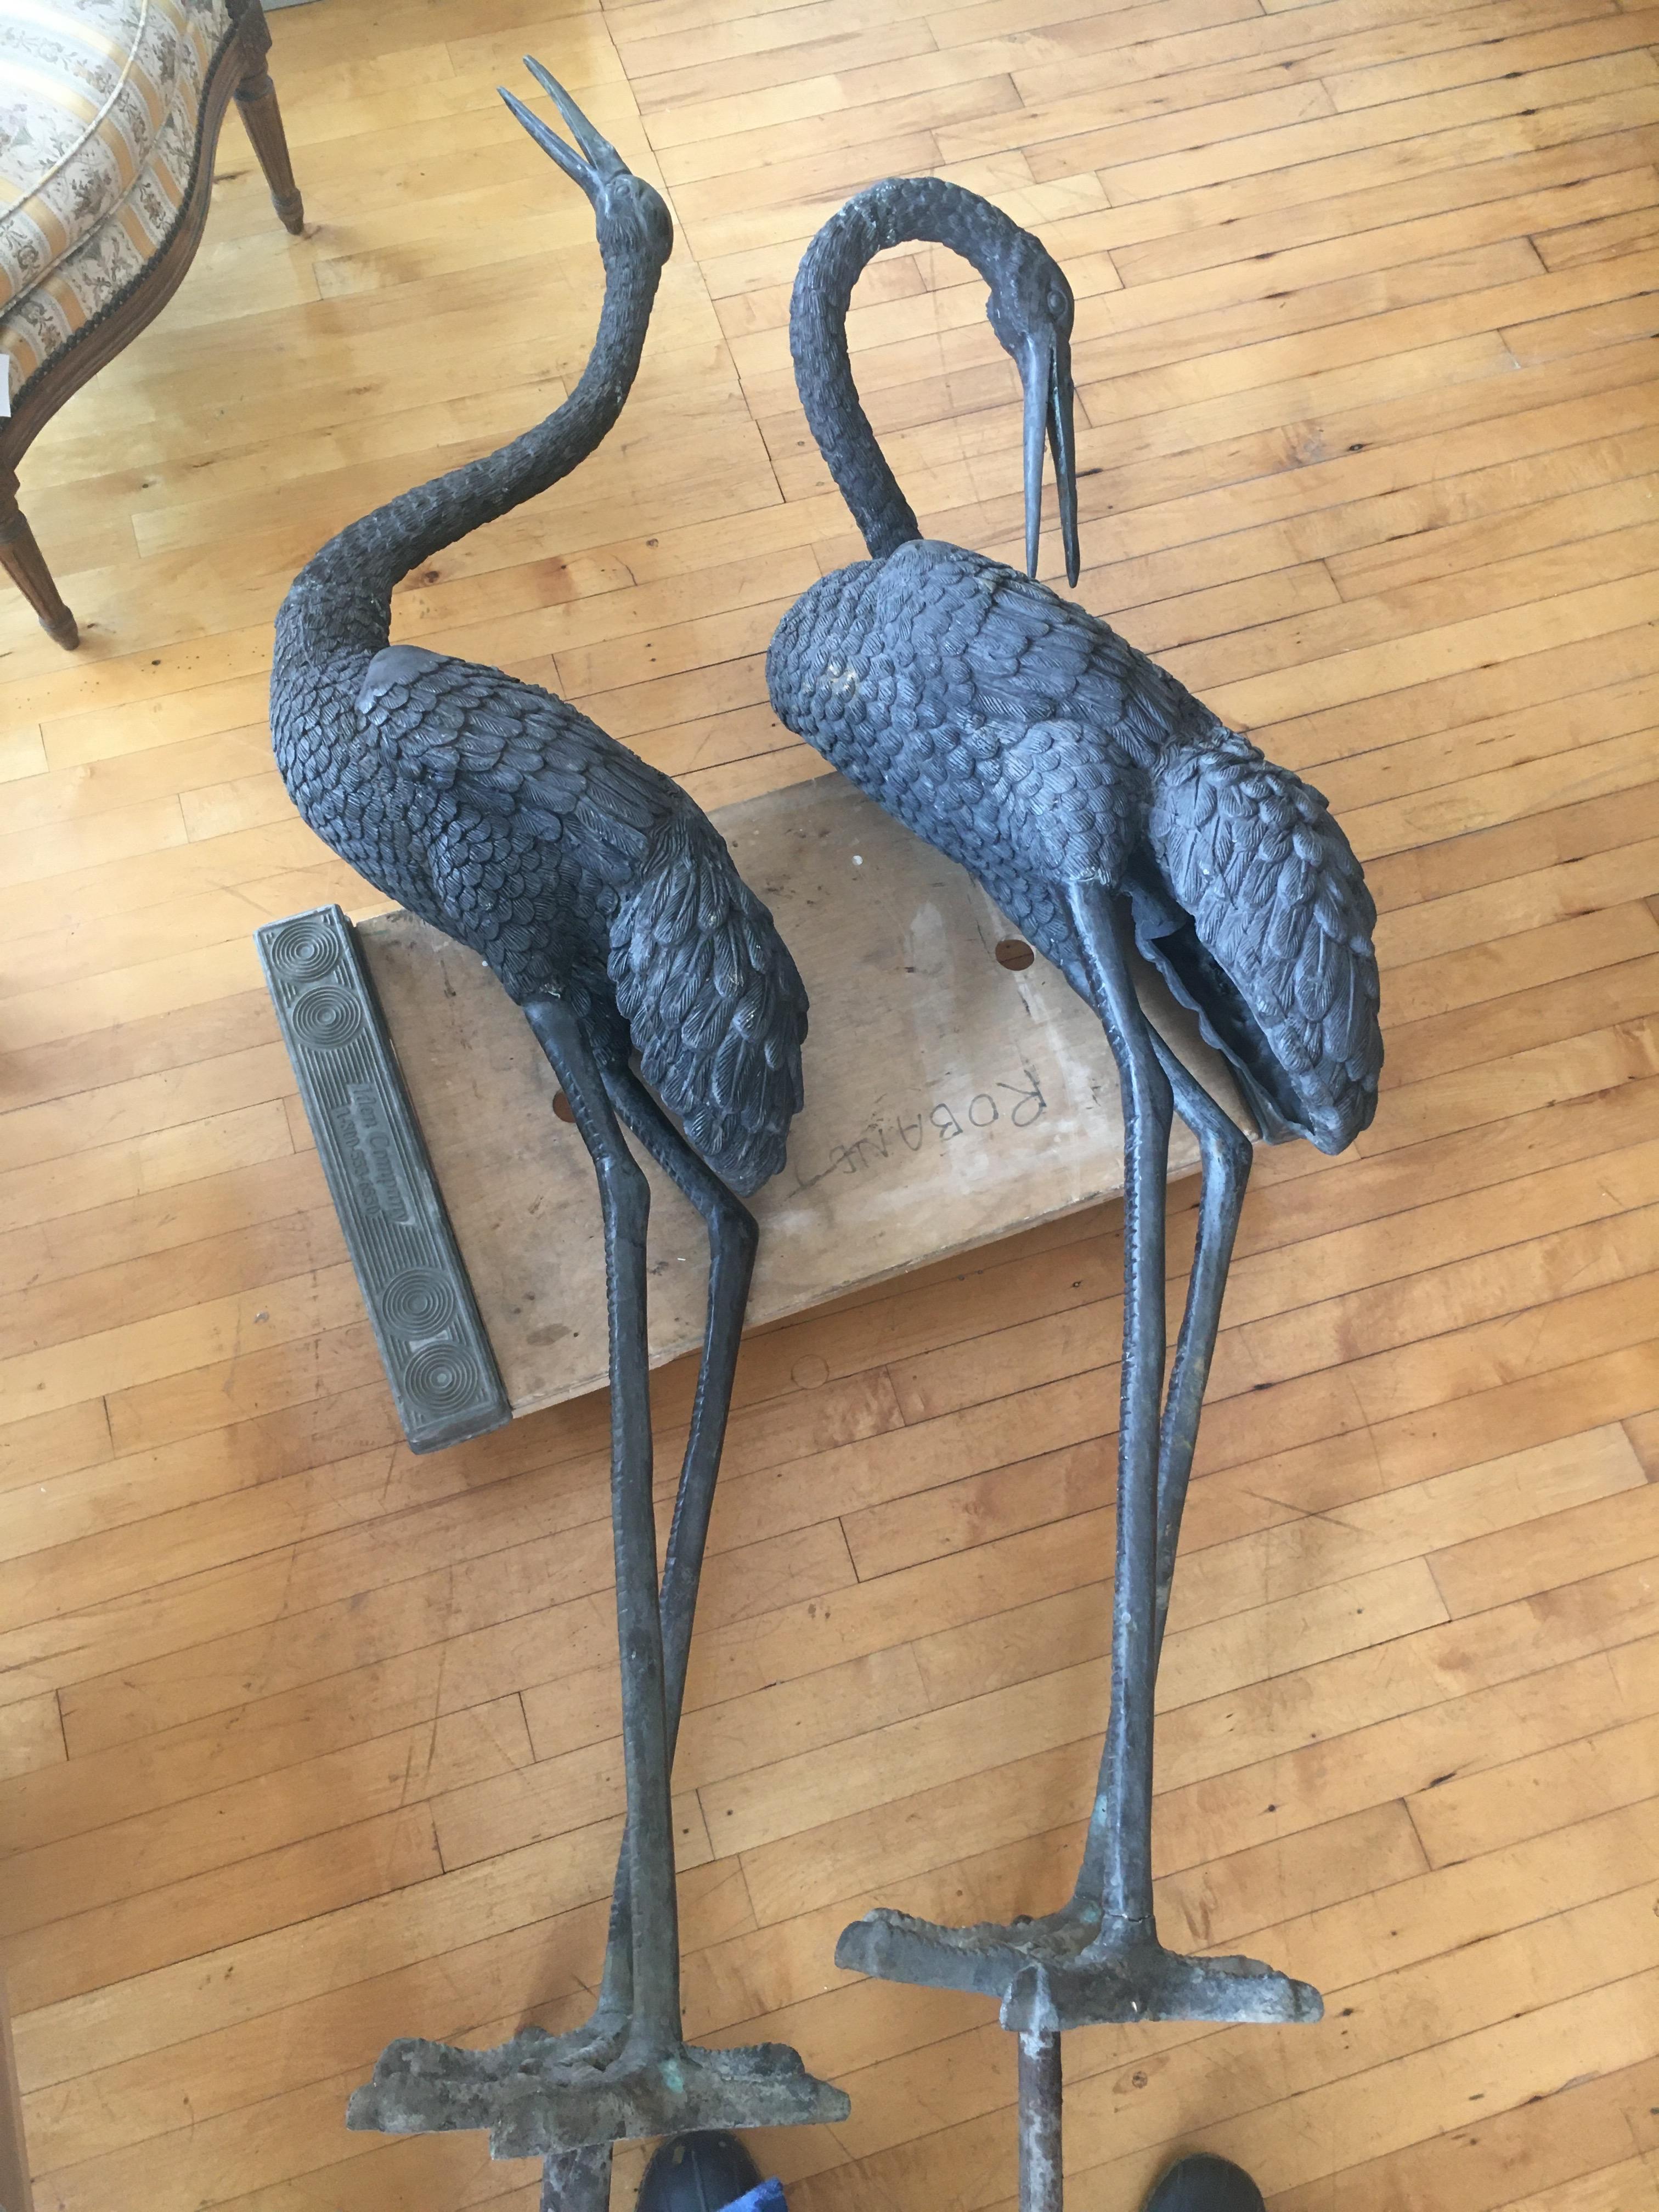 Monumental pair of bronze cranes in standing position. Great color and patina. Could be used either indoor or outdoor. We are having them mounted on an ebonized pedestal base. Note in picture that they have stakes that go into the ground that we are